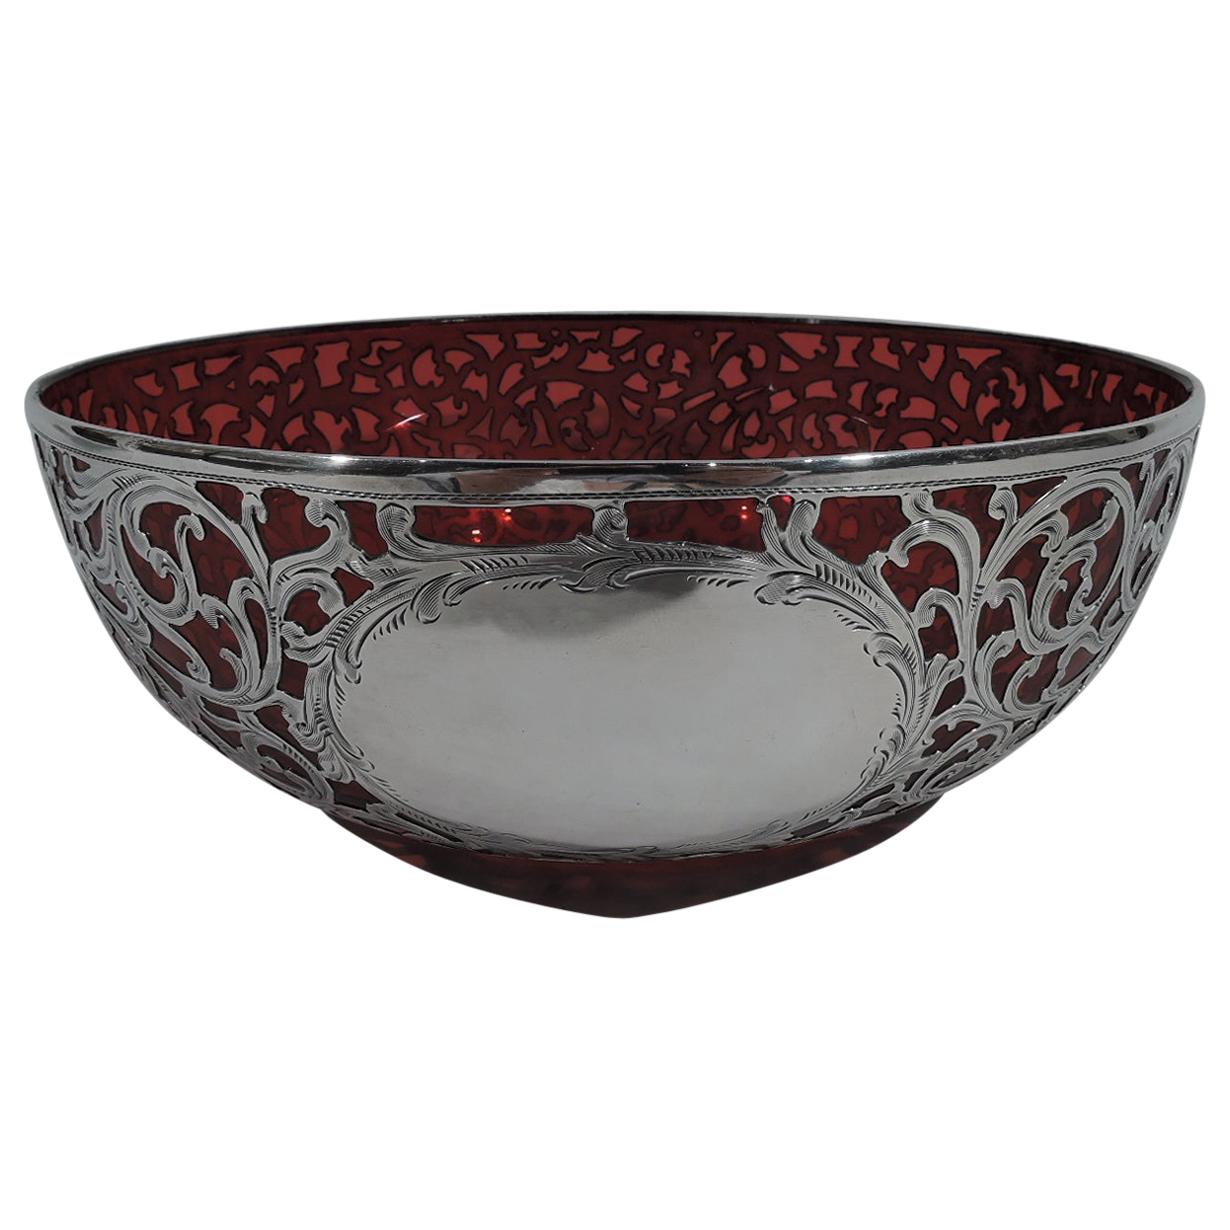 Beautiful Art Nouveau Red Glass and Silver Overlay Bowl by Alvin